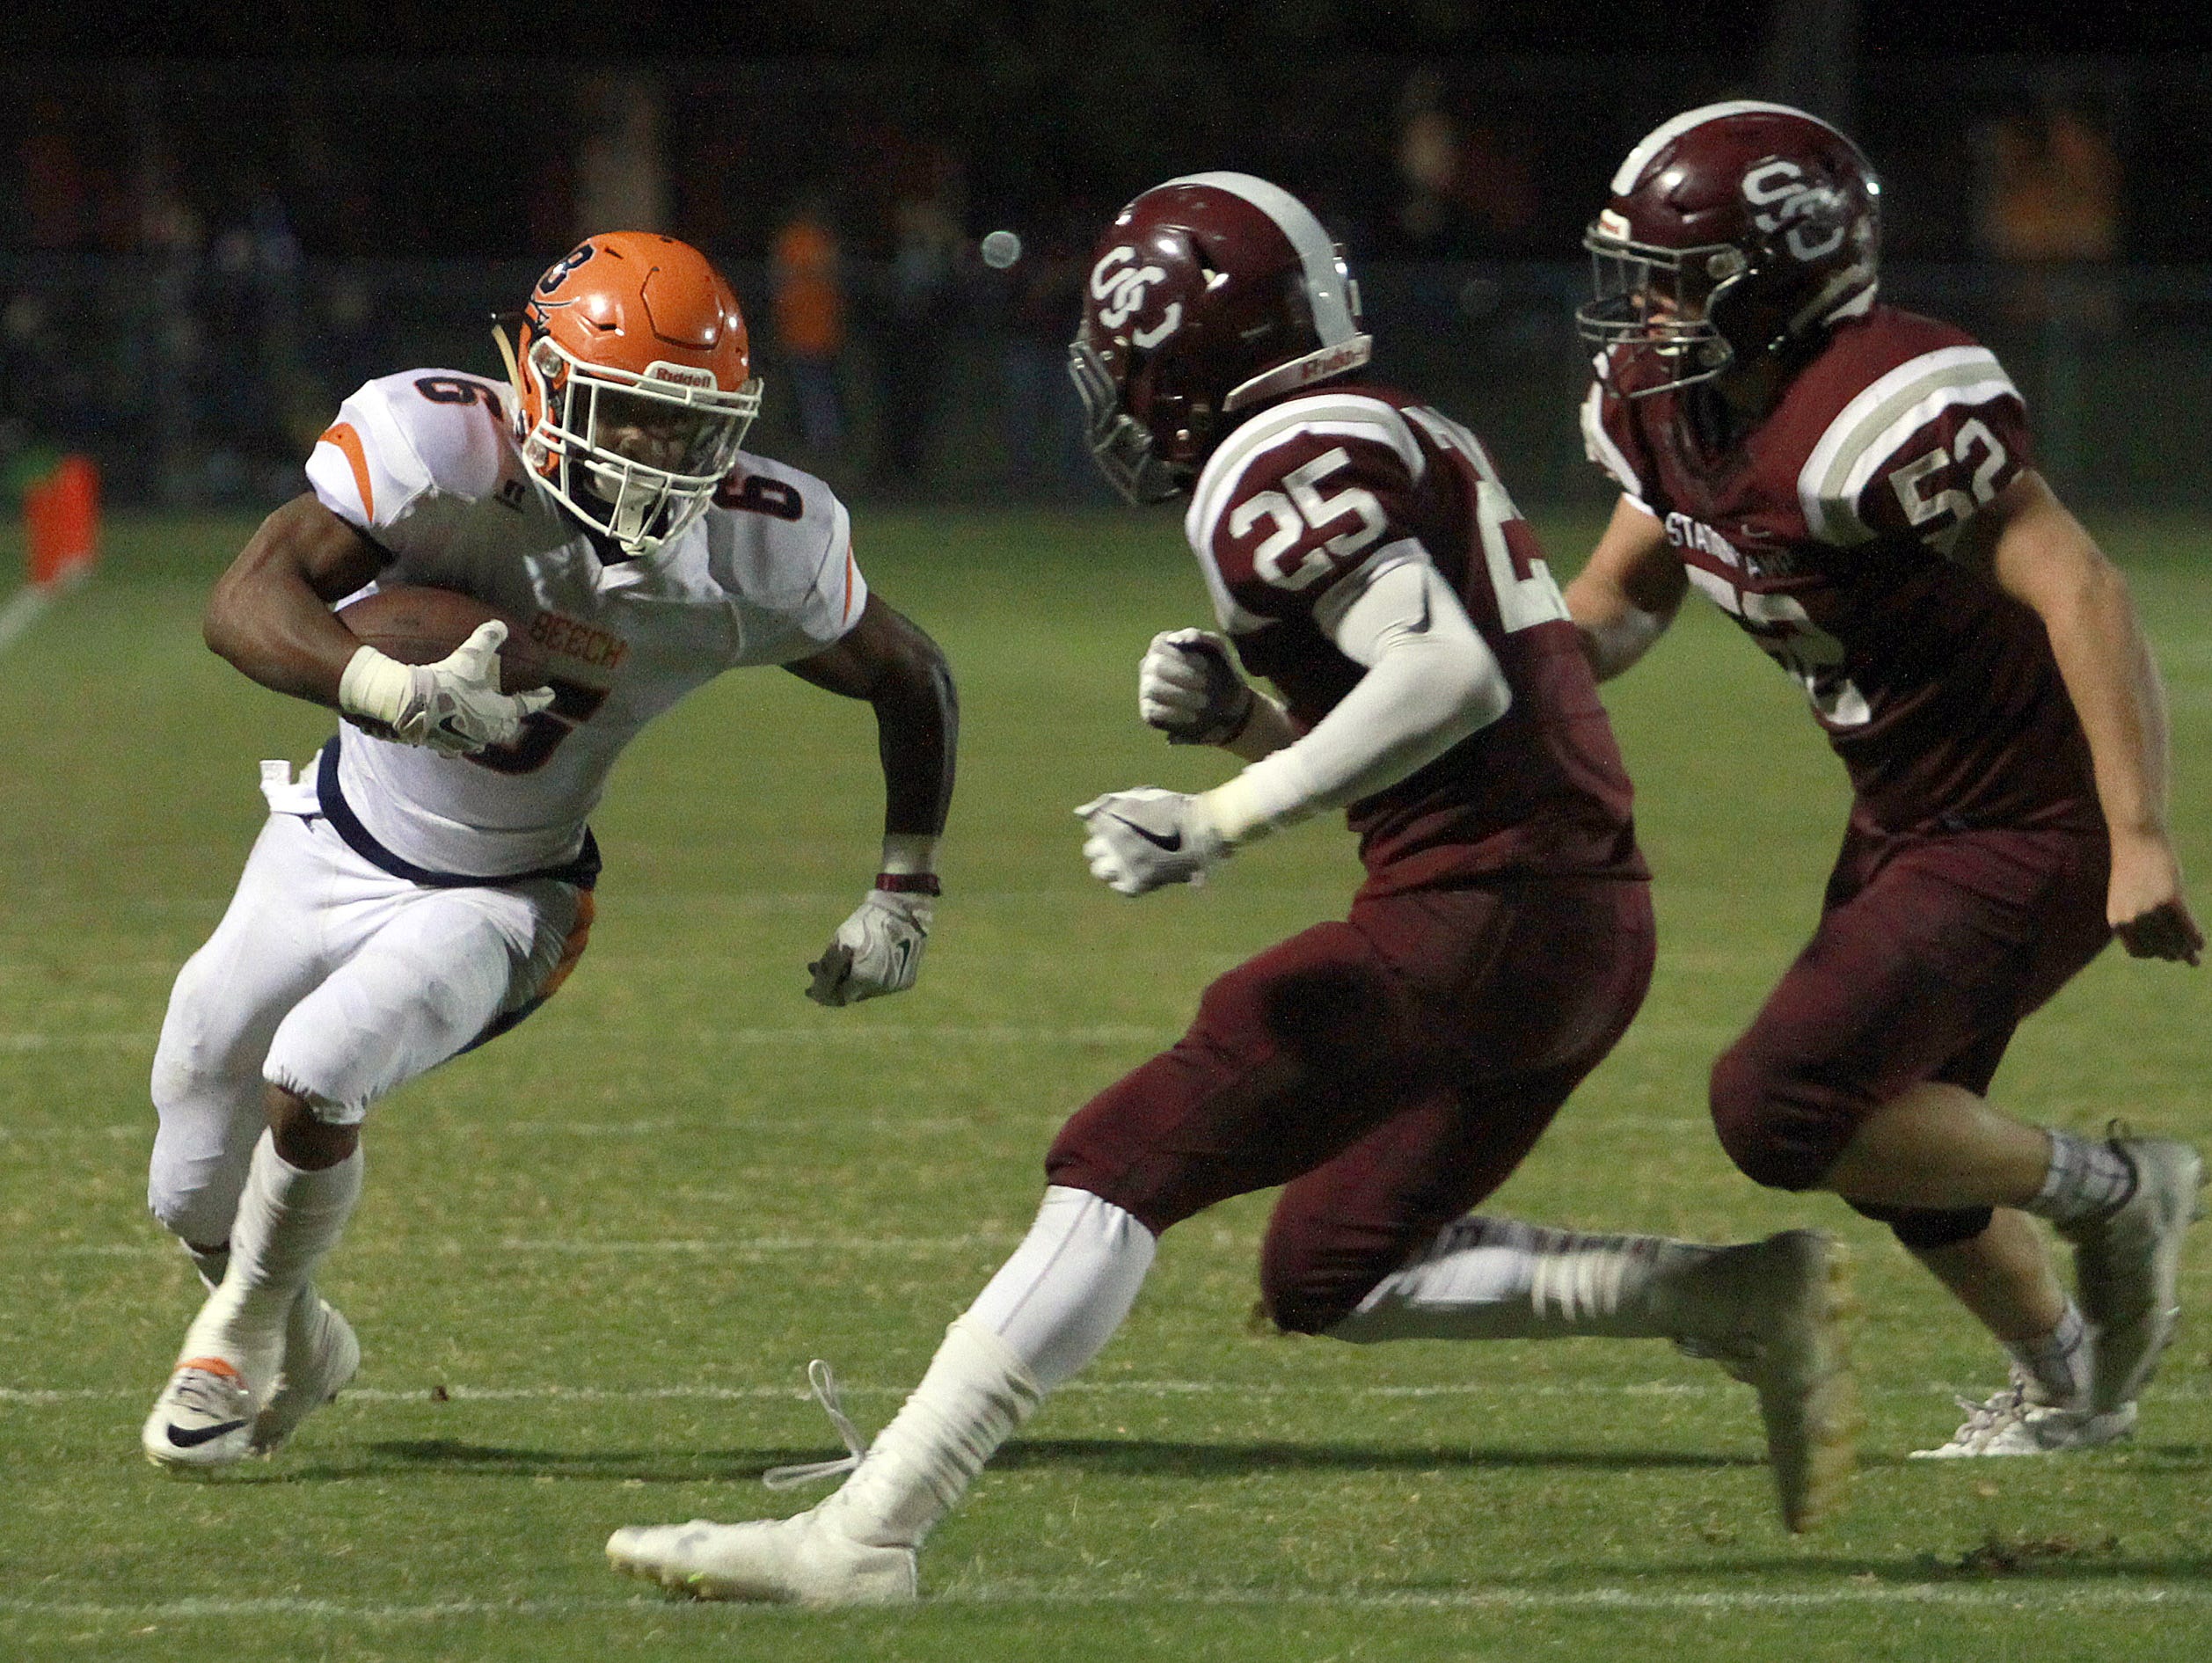 Beech's Alex Vanzant rushes as Station Camp's Shawn McKinley (25) and Simon Freeman force him to the sideline and short of the goal line during their game earlier this season. Beech is ranked ninth in this week's Class 5A poll and hosts Hunters Lane on Friday.